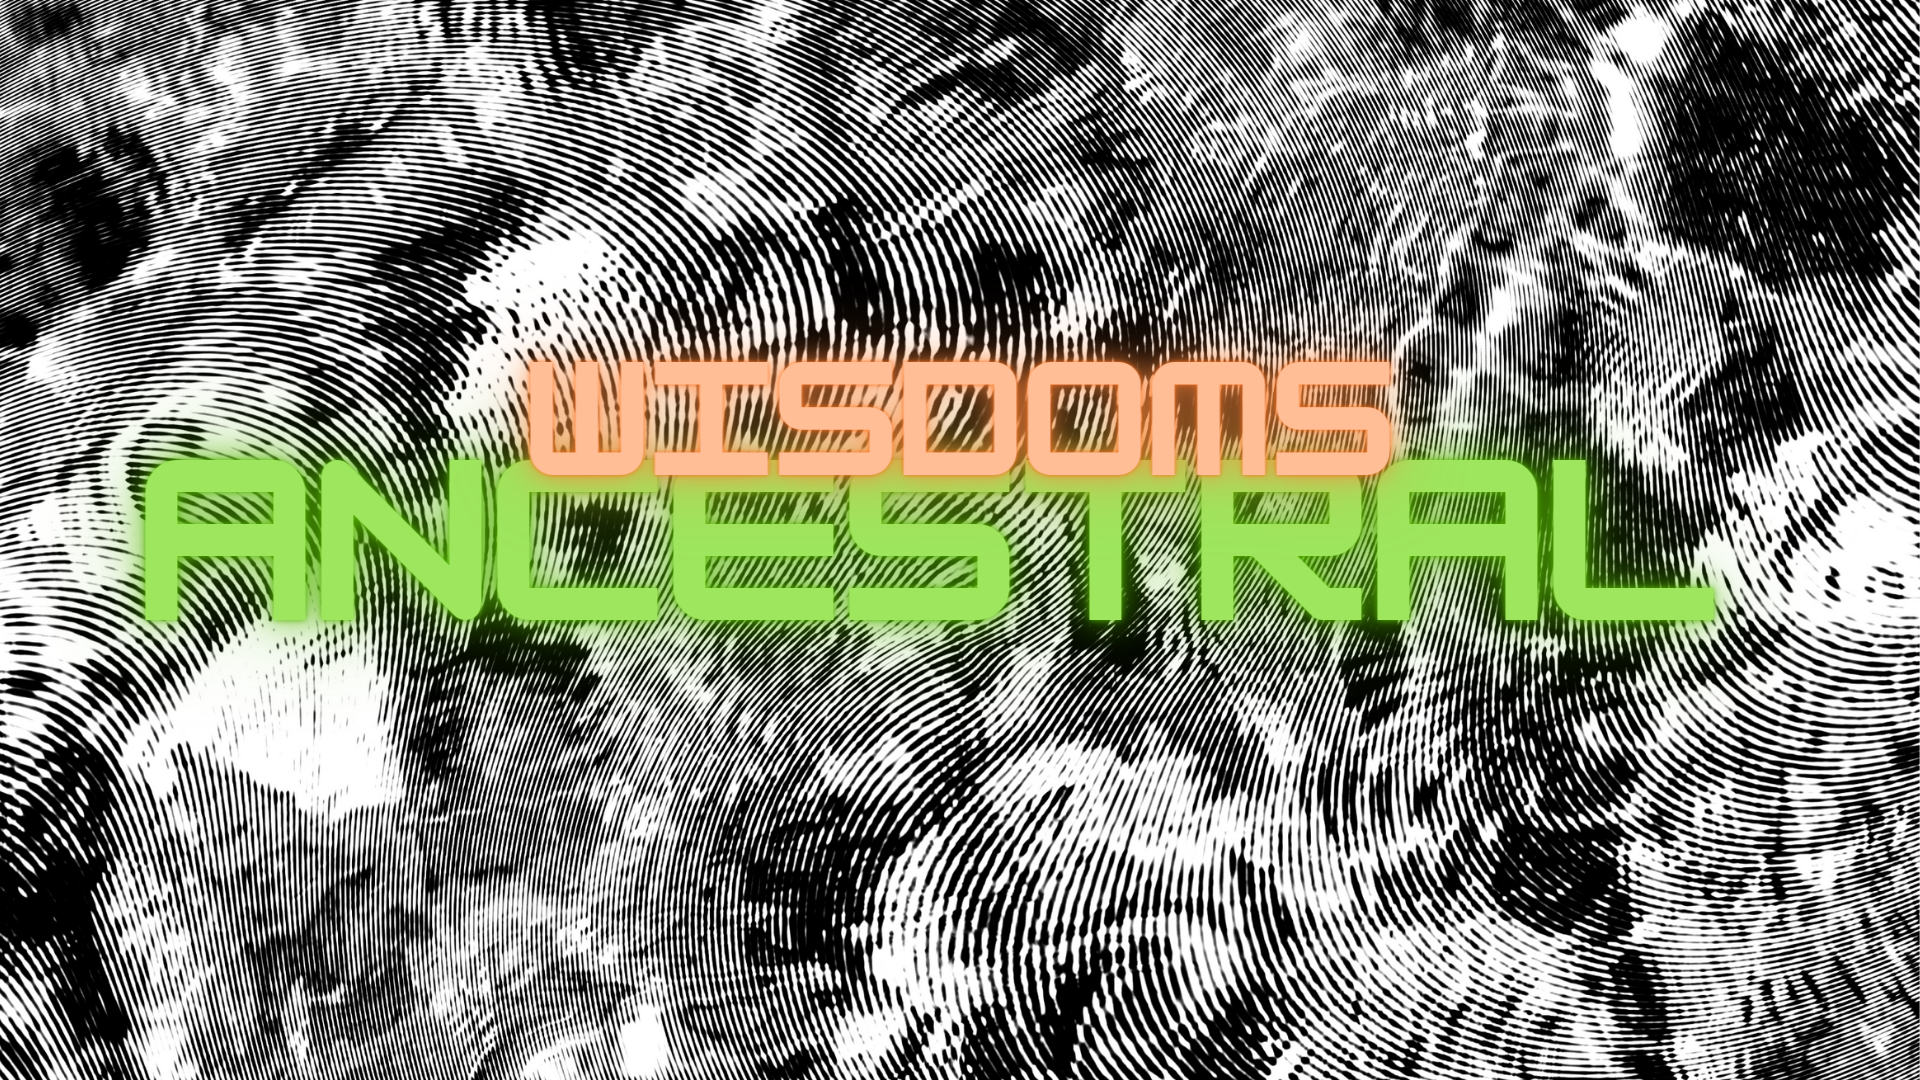 The words 'Ancestral Wisdoms' written in glowing green and orange text on a background of abstract, overlapping fingerprints.